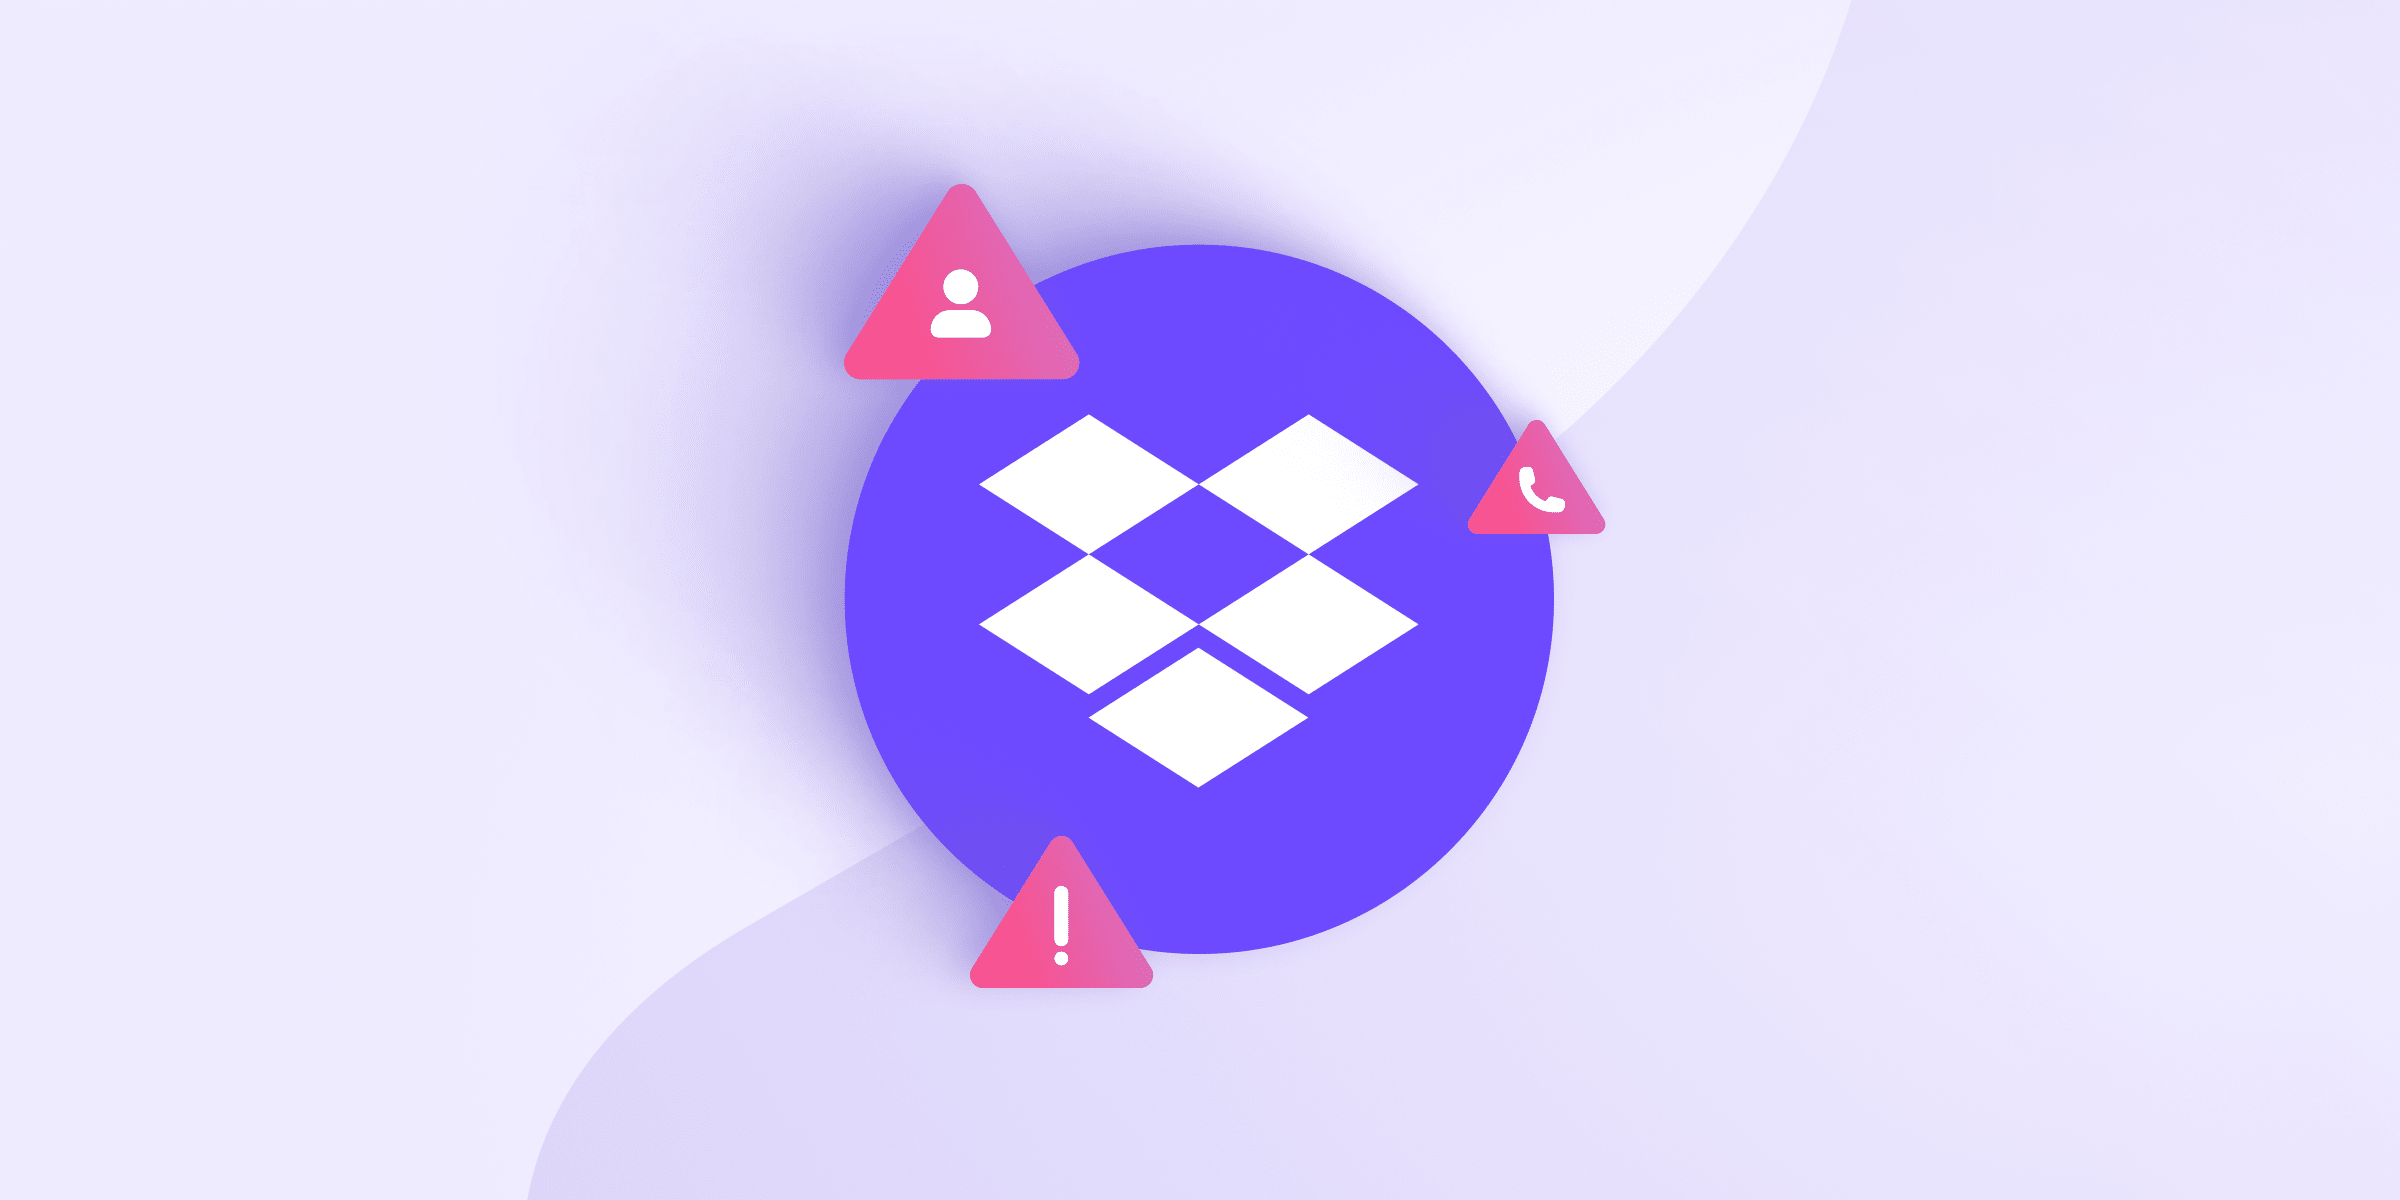 Dropbox security issues